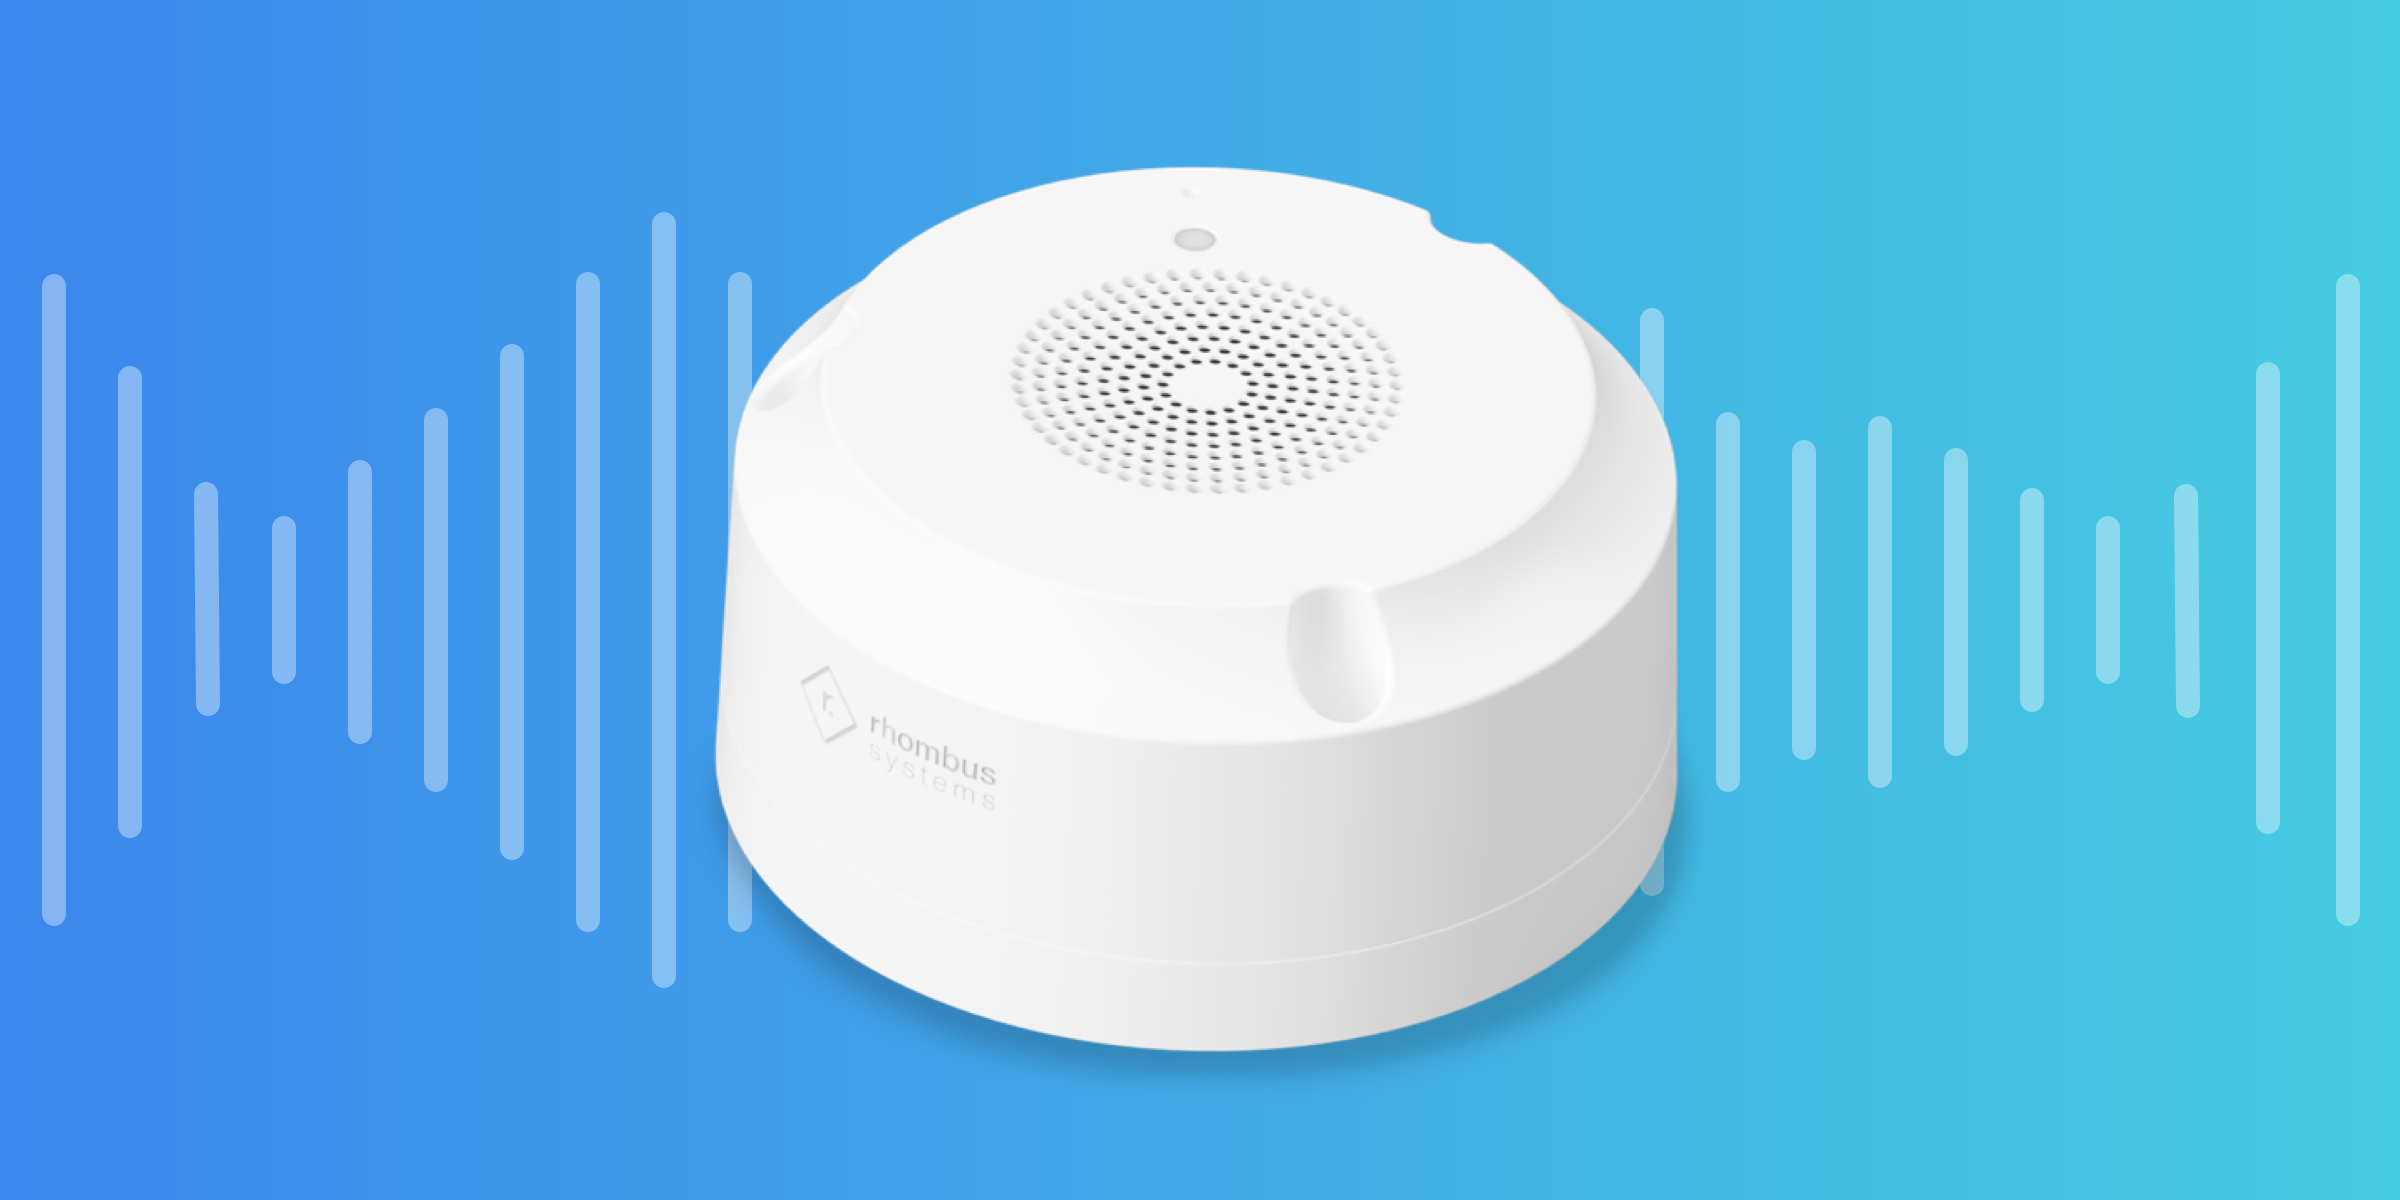 Introducing the A100 Sensor: Enhance Security with Smart Audio